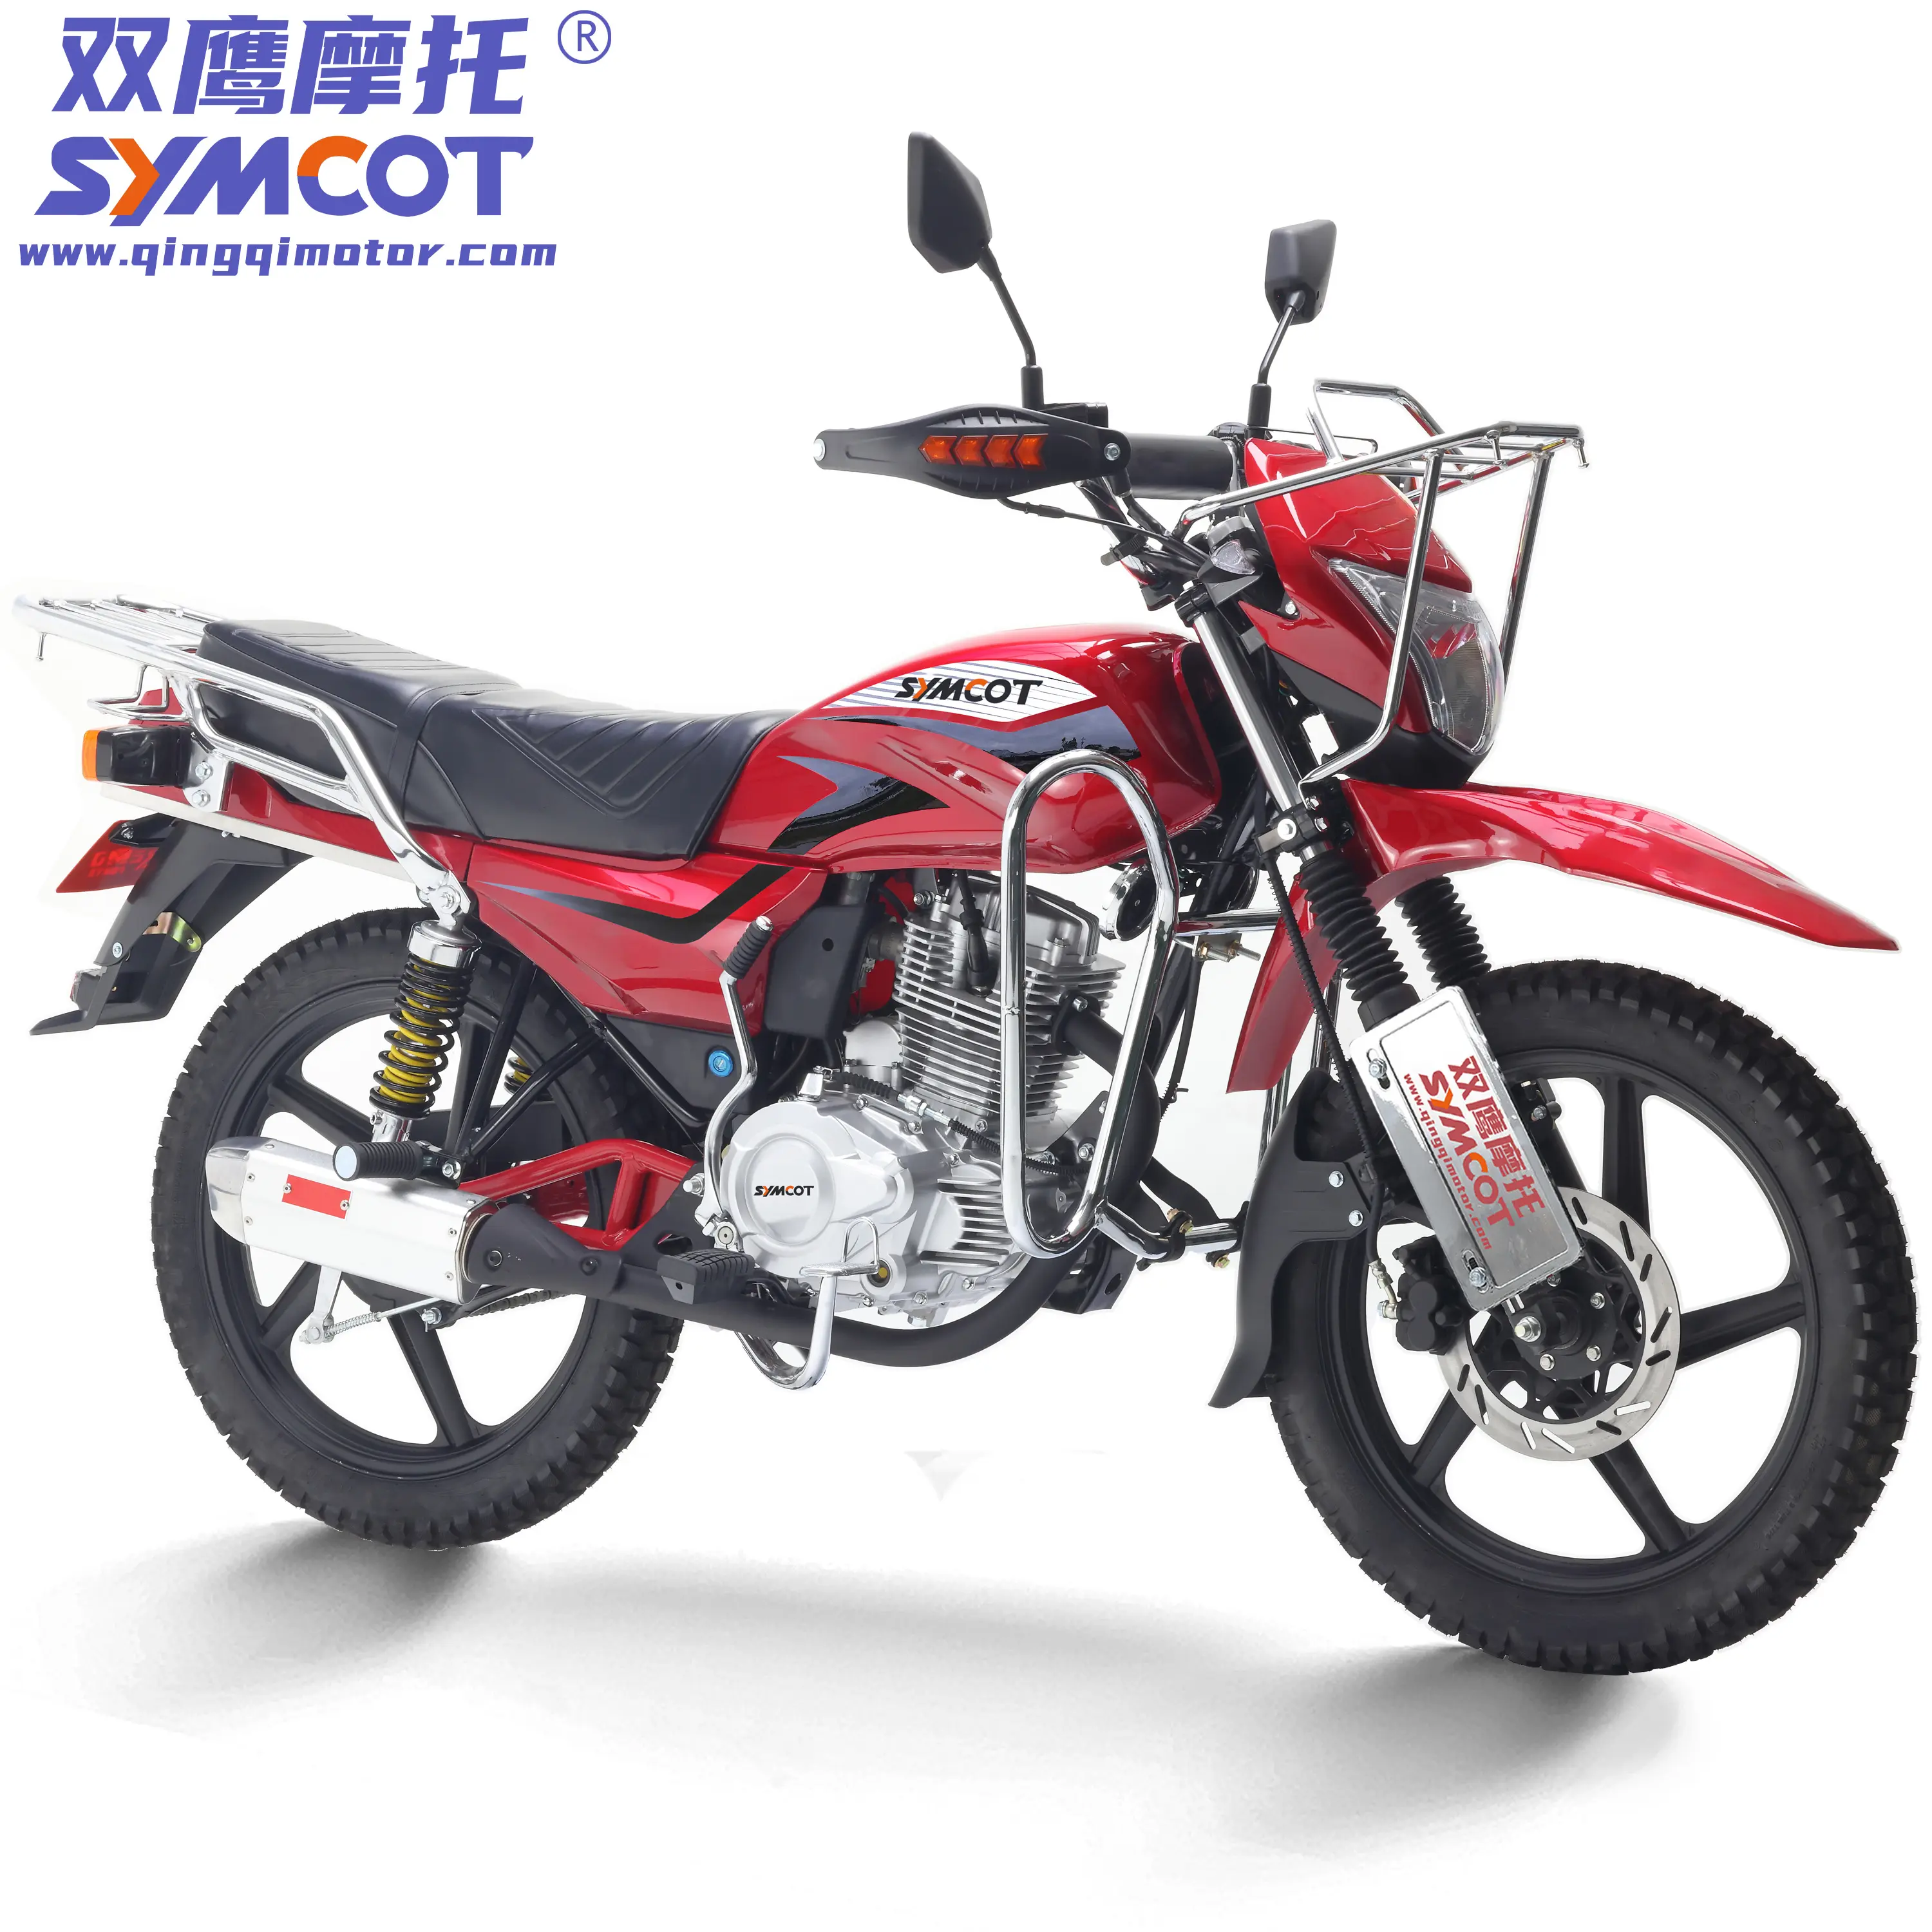 CGLbro model new CGL200 with broz headlight new rear fork with fairing head hot sell in Boliva with new design of wuyang model